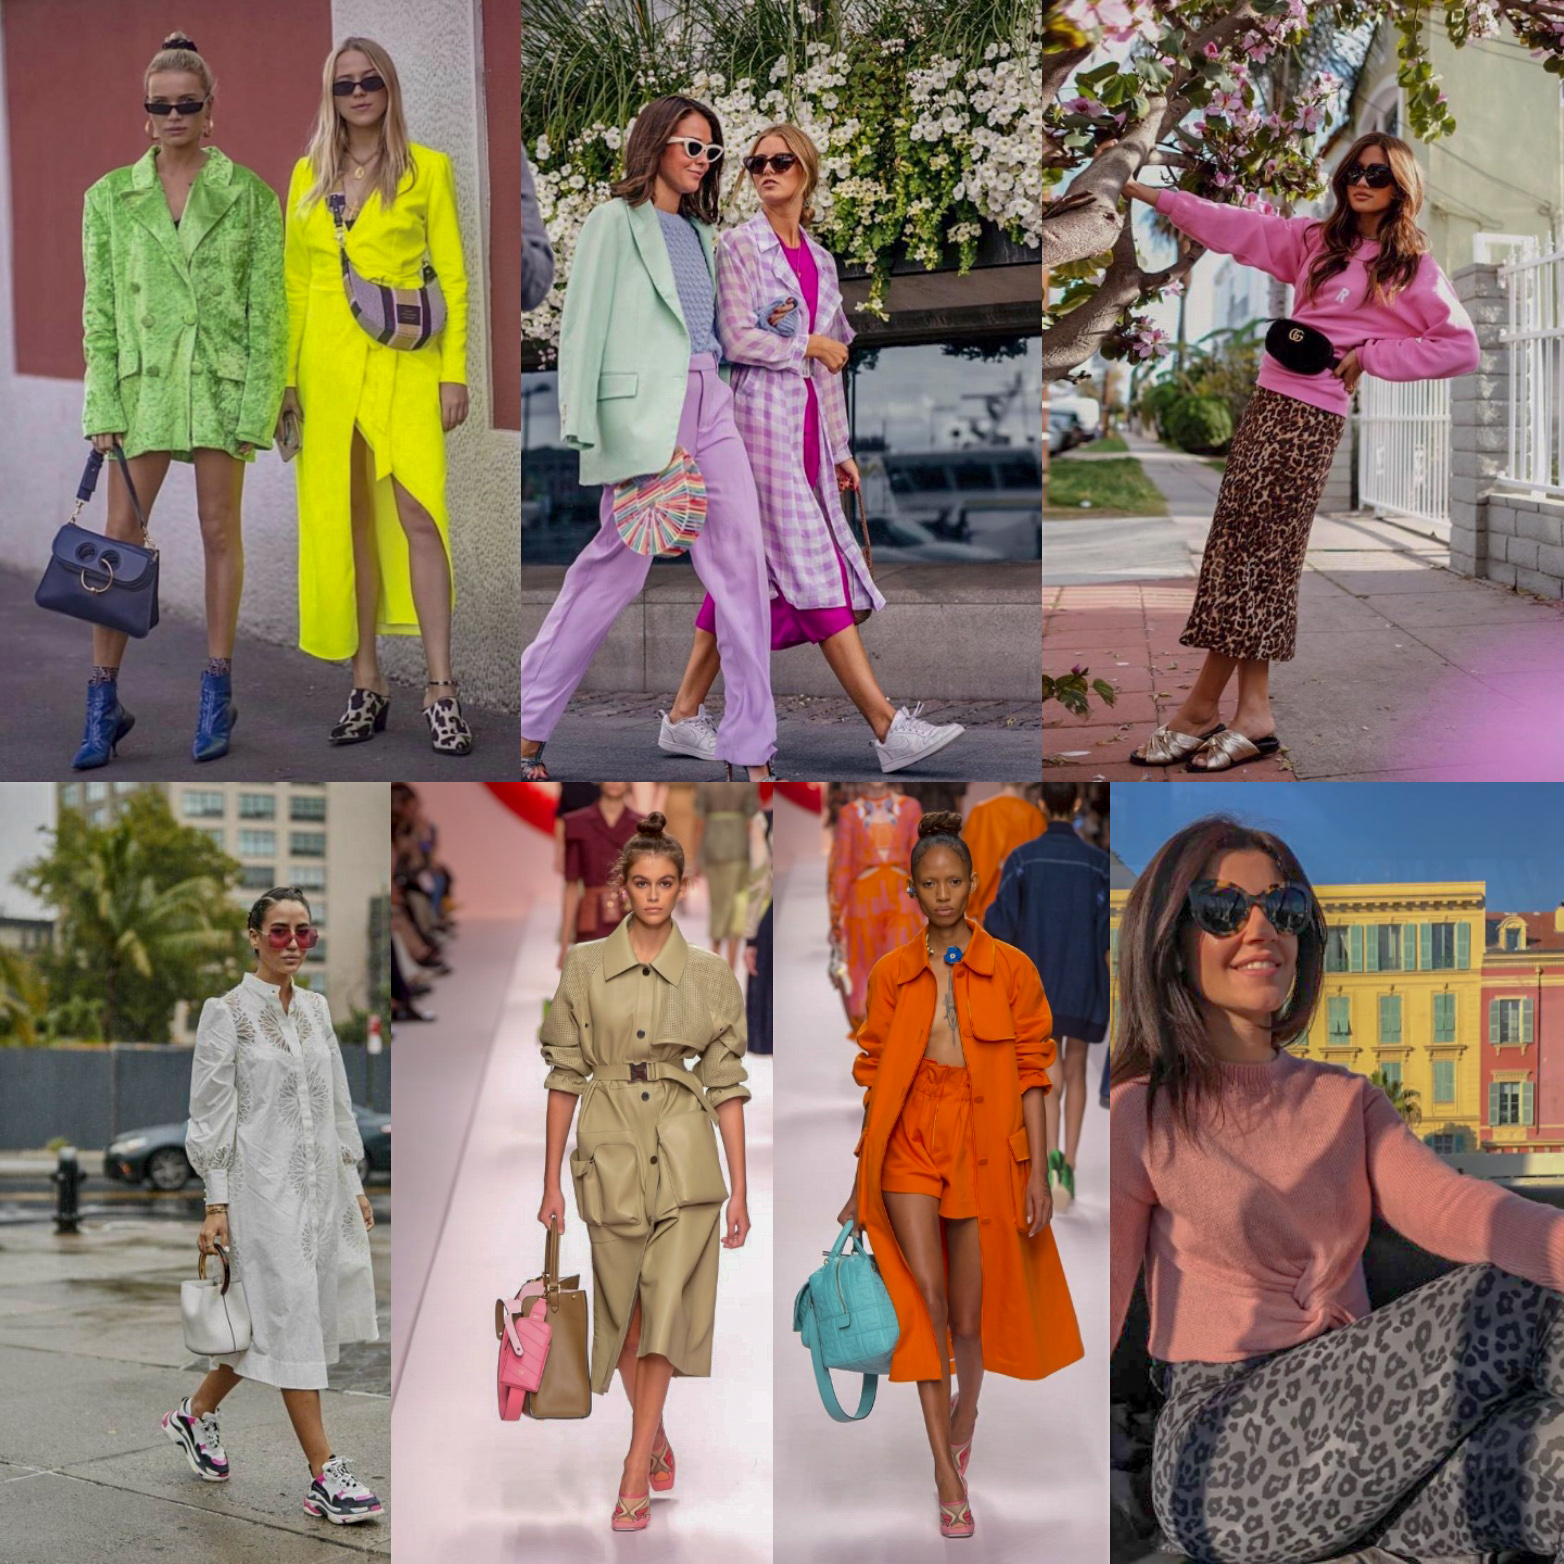 [:it]How to dress in spring: All the new spring summer trends 2019[:in]HOW TO DRESS IN SPRING: ALL THE NEW TRENDS FOR SPRING / SUMMER 2019[:]